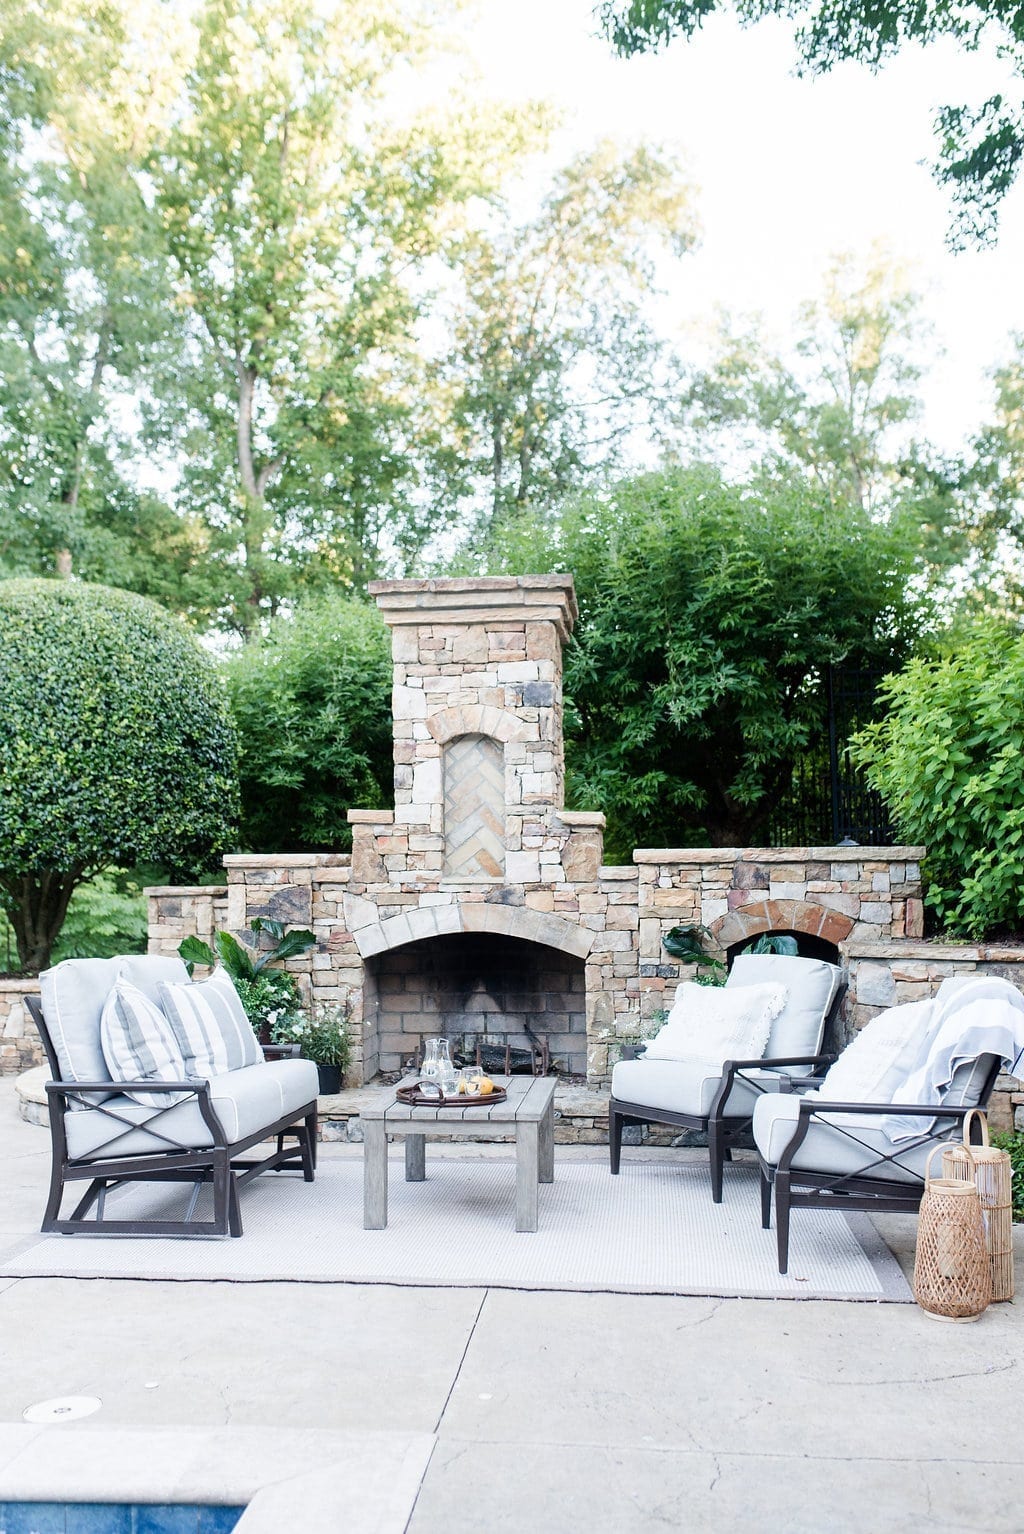 Atlanta backyards and Pebble Tech swimming pool. Outdoor fireplace and landscaping ideas.